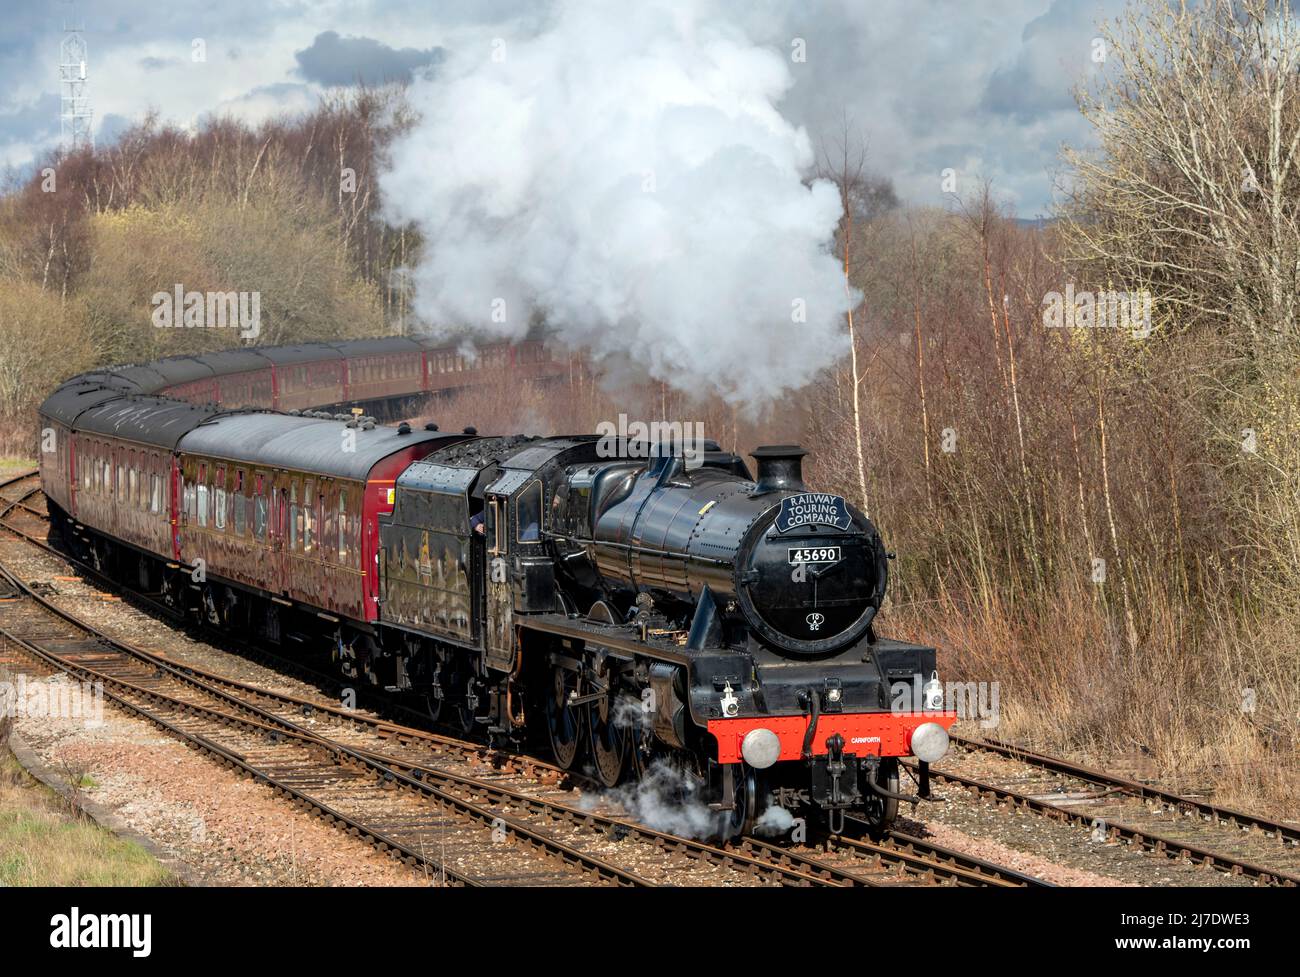 The Cumbrian Coast Express, Steam Locomotive, Jubilee Class, 45690 Leander , LMS, departing Carlisle on 12th March 2022 (Railway Touring Company Stock Photo